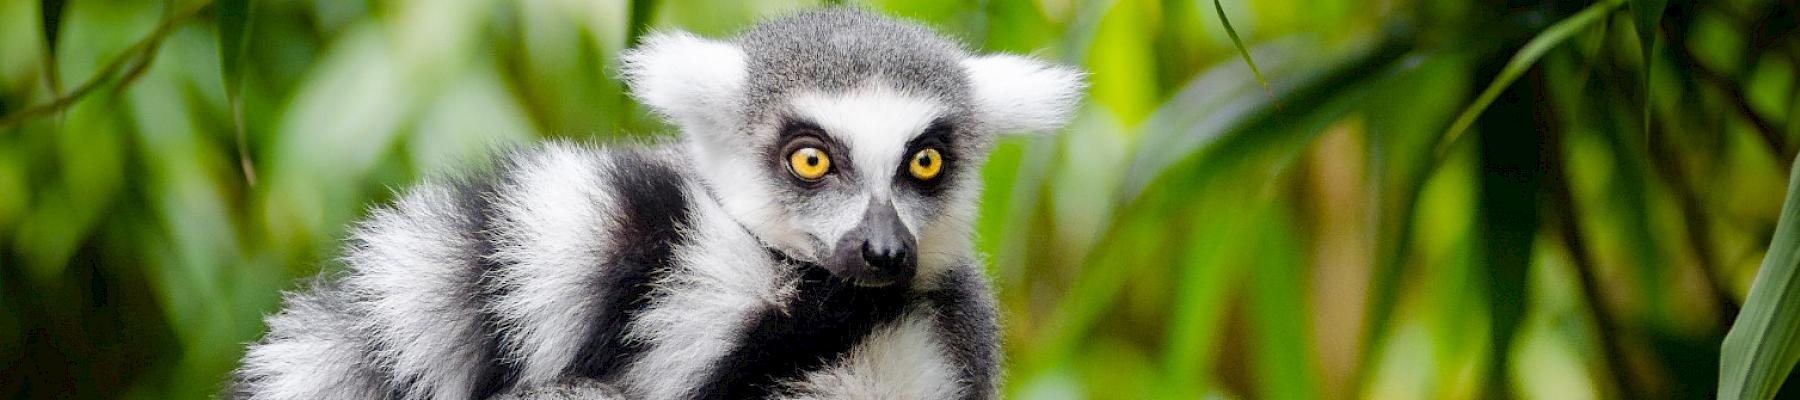 Ring-tailed lemur, Lemur catta, listed as Endangered on The IUCN Red List of Threatened Species